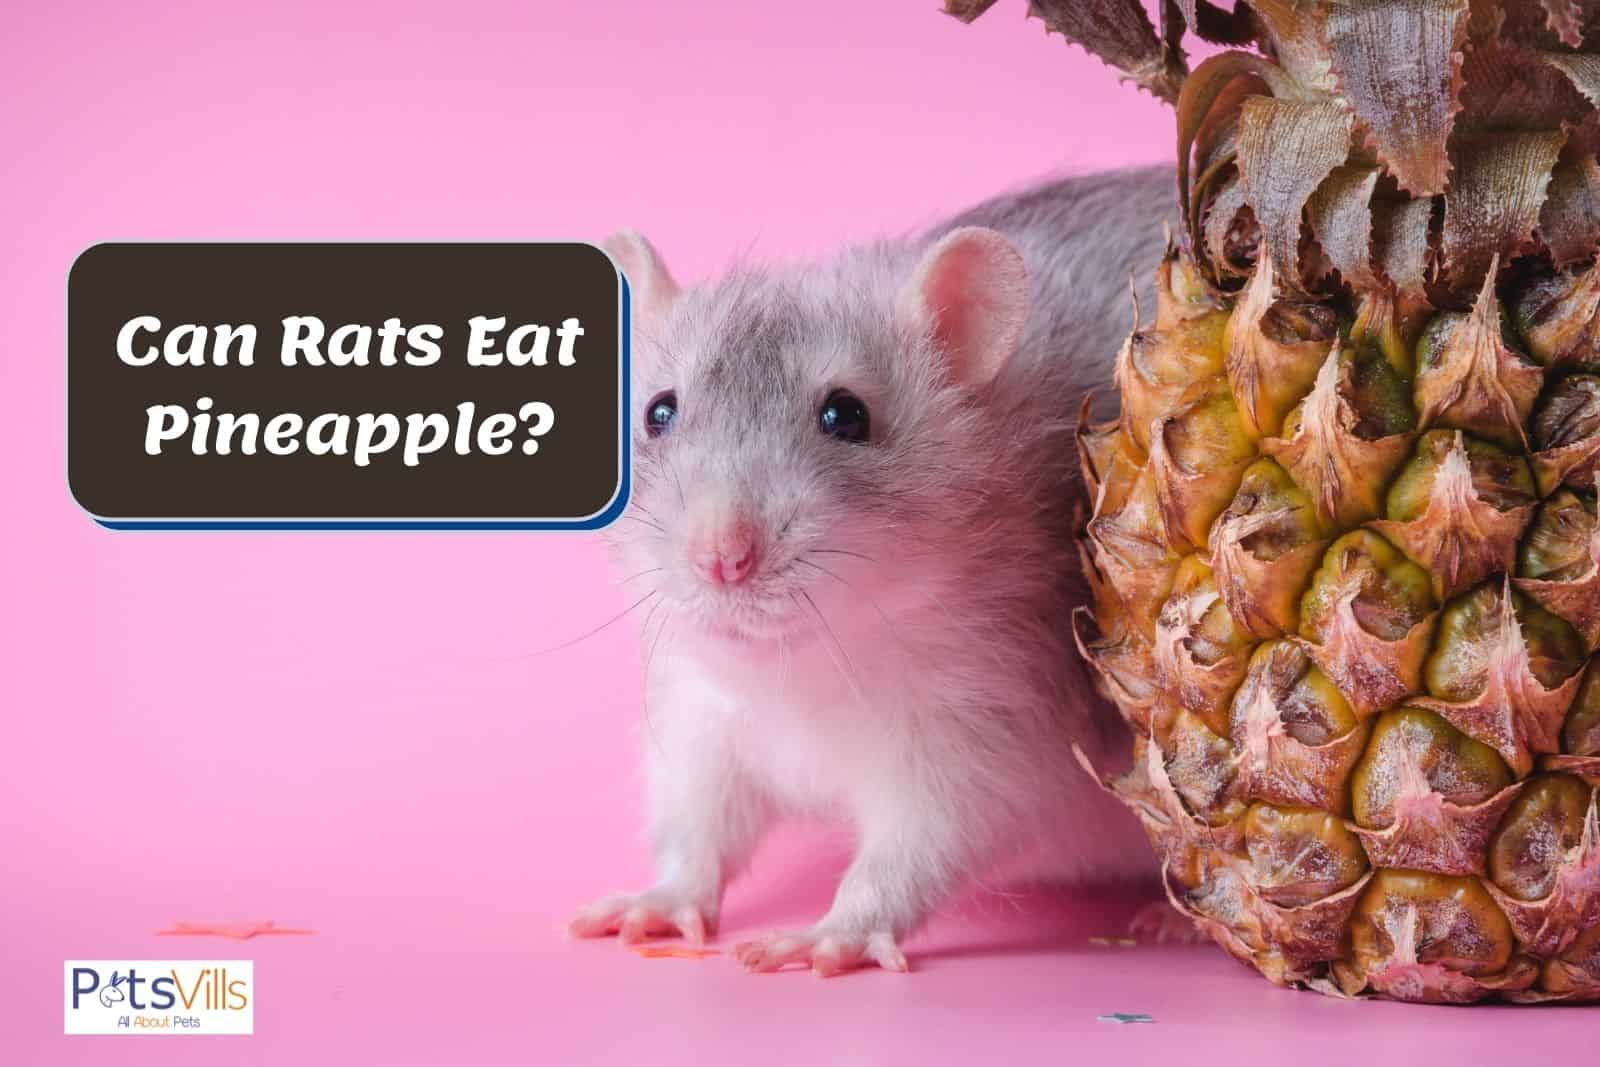 grey rat beside a pineapple so can rats eat pineapple?